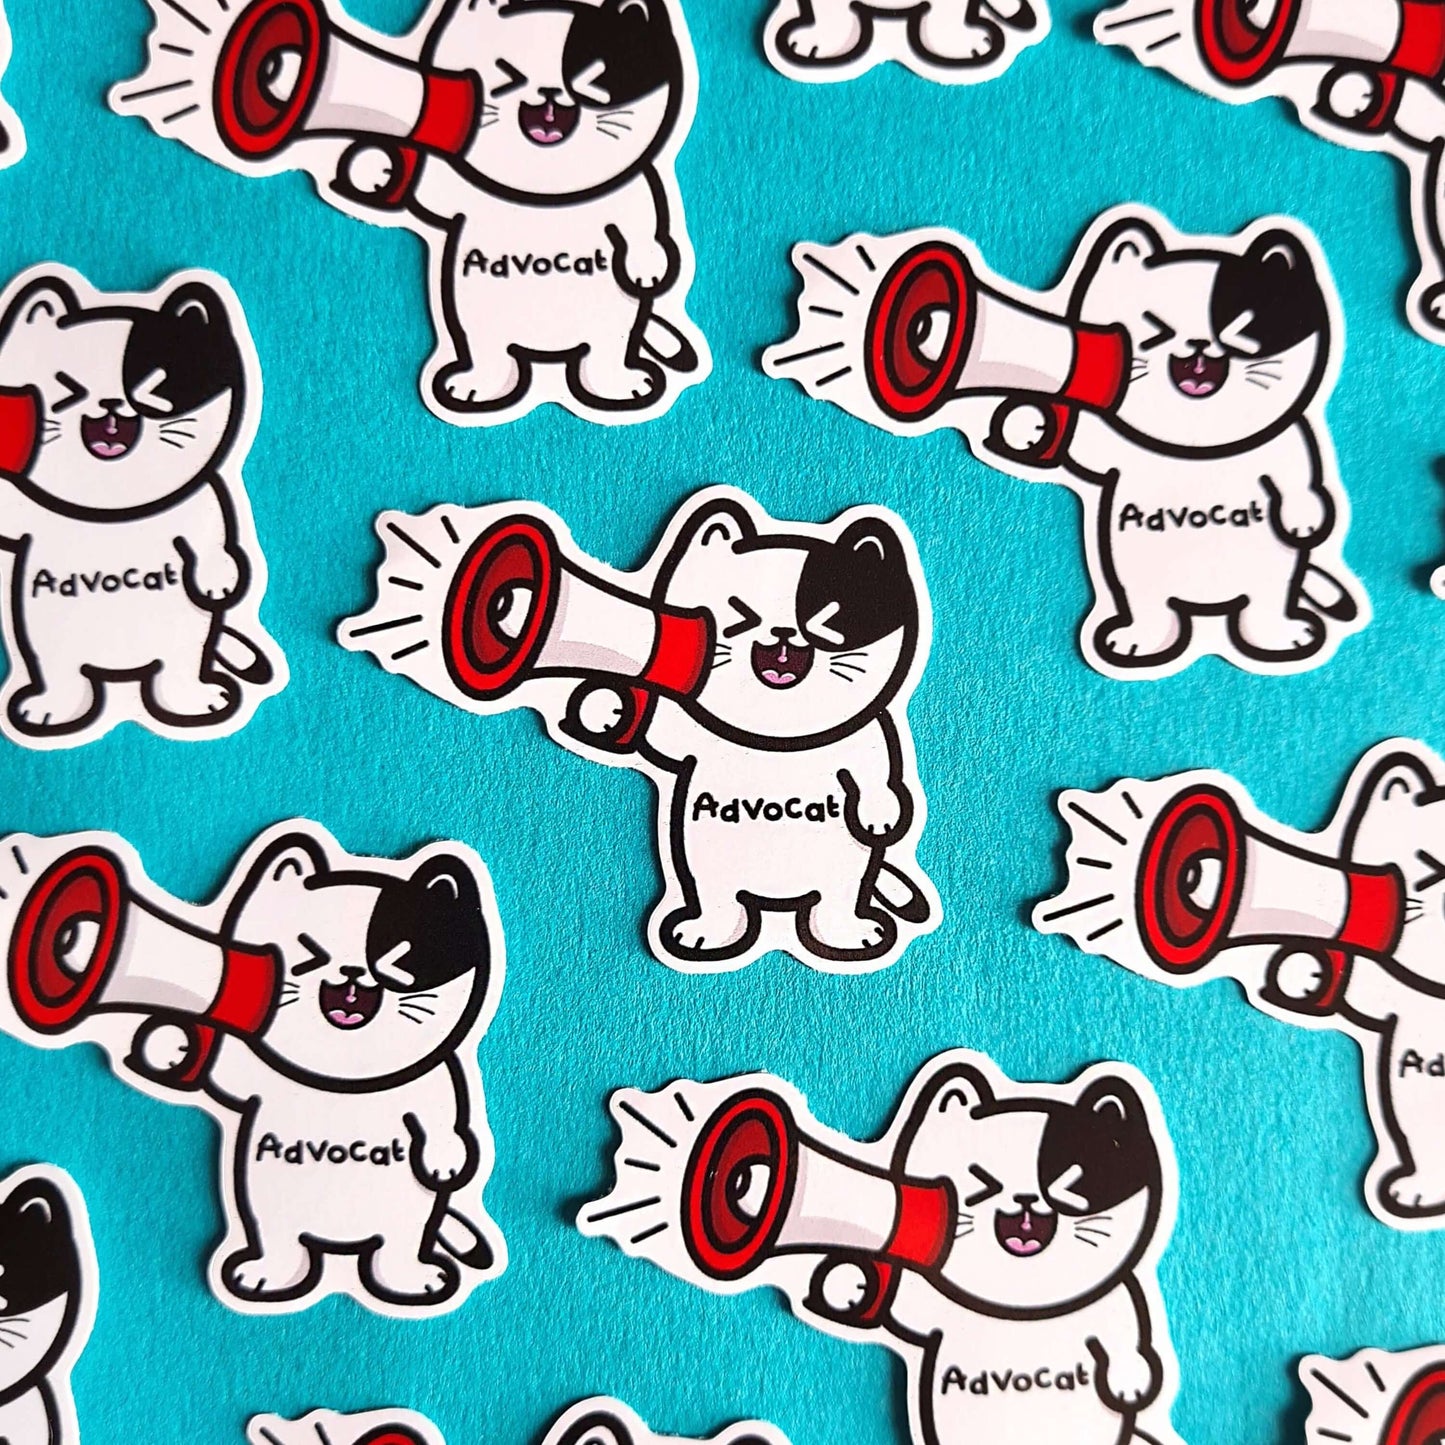 Multiple copies of the Advocate Cat Stickers on a blue background laid out in a repeating pattern. The black and white cat shape vinyl sticker is smiling shouting into a red and white megaphone with black text across its middle reading 'advocat'. The hand drawn design is raising awareness for mental health and disabilities.